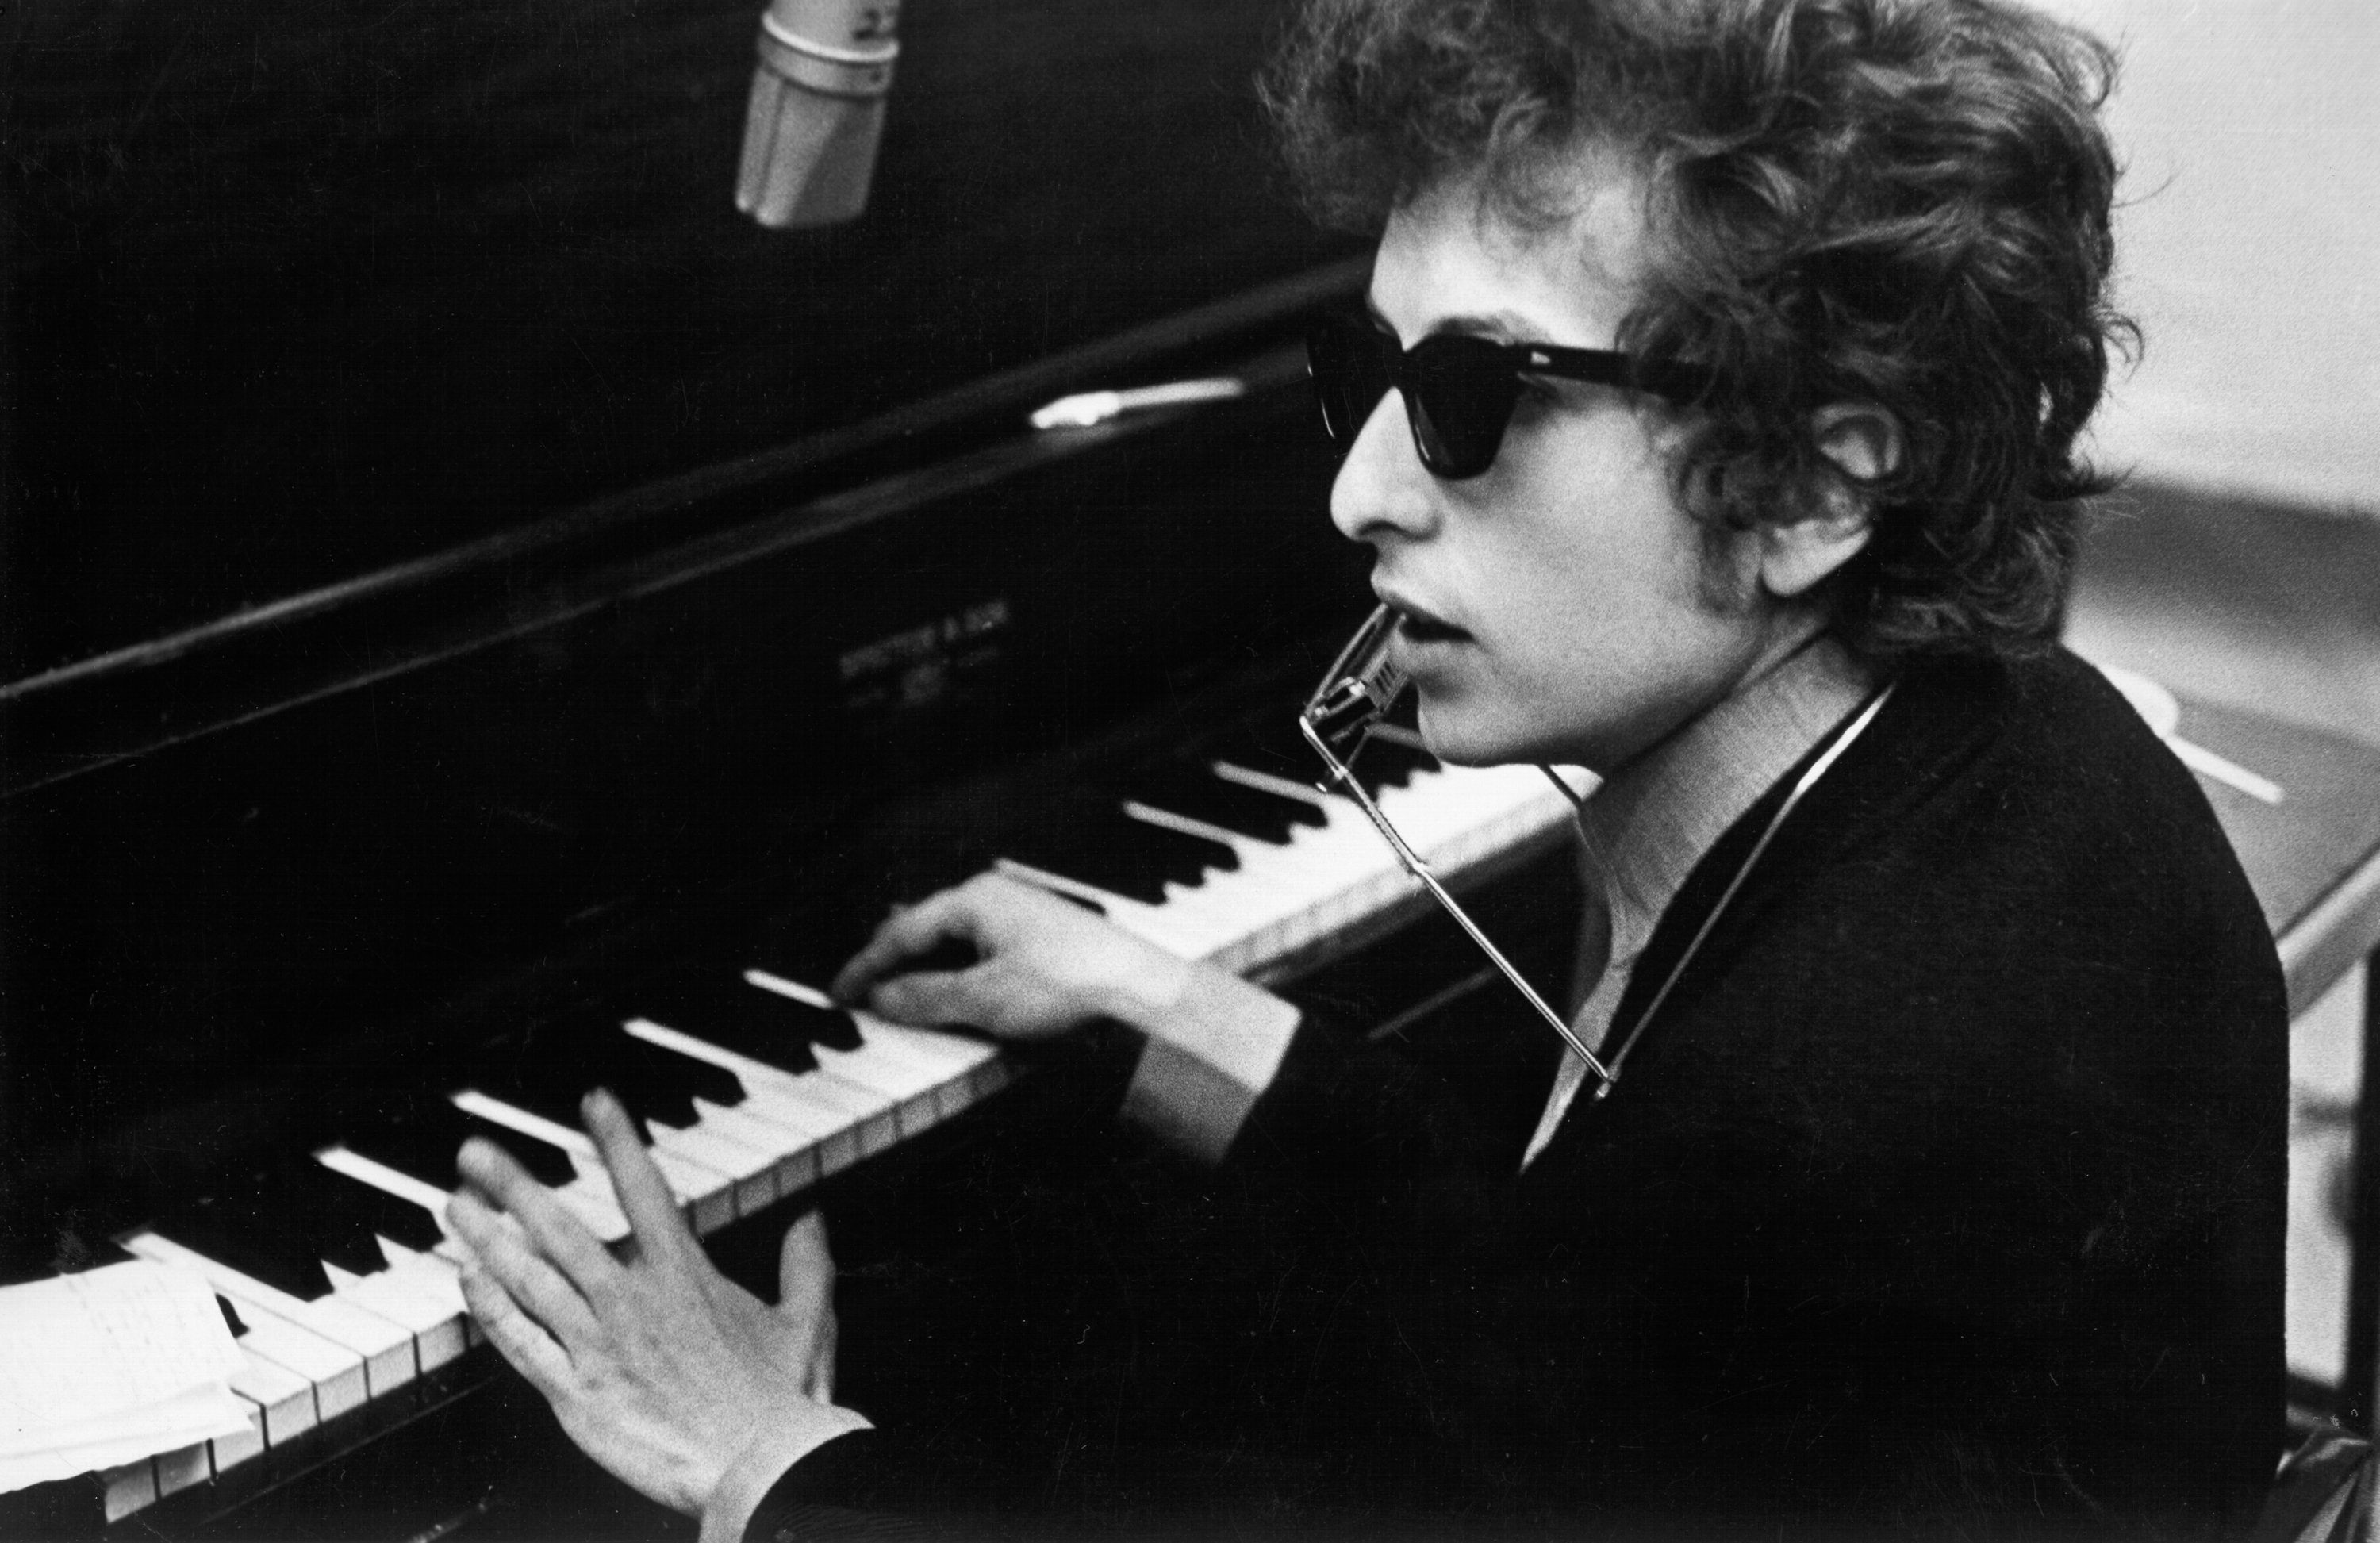 Bob Dylan with a piano